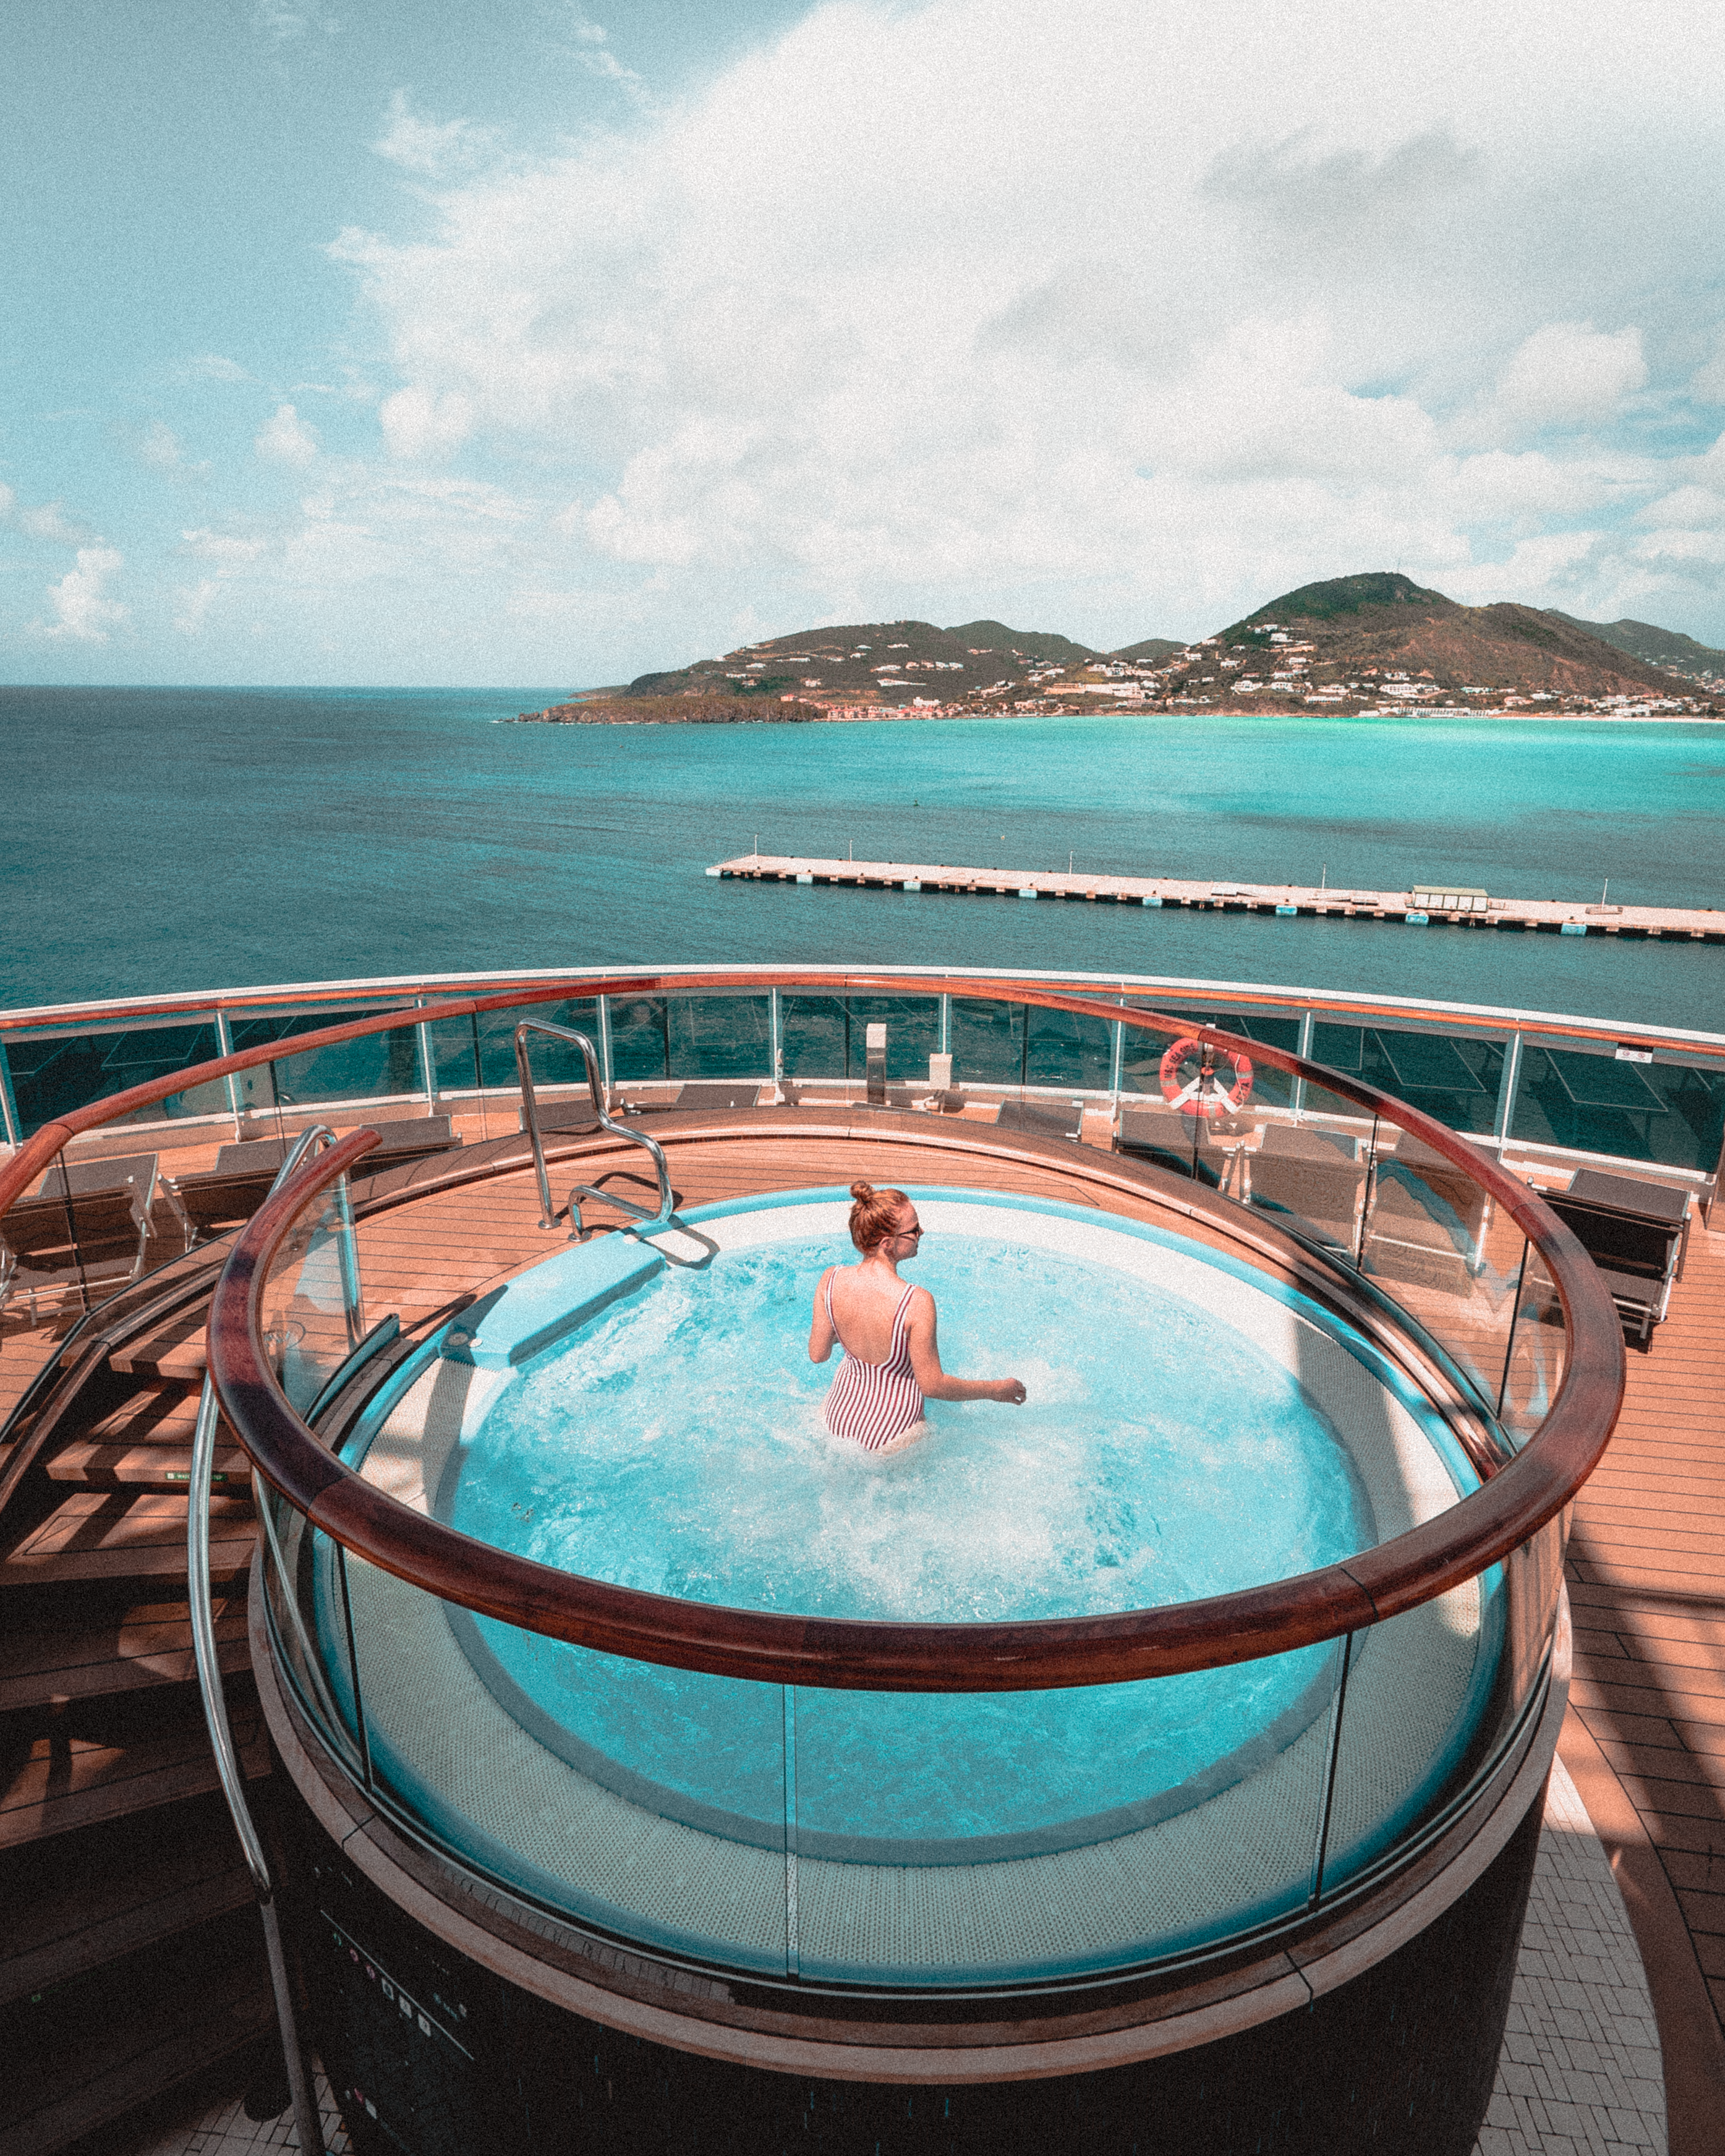 6 Reasons Why You Should Book an MSC Seaside Cruise Right Now!